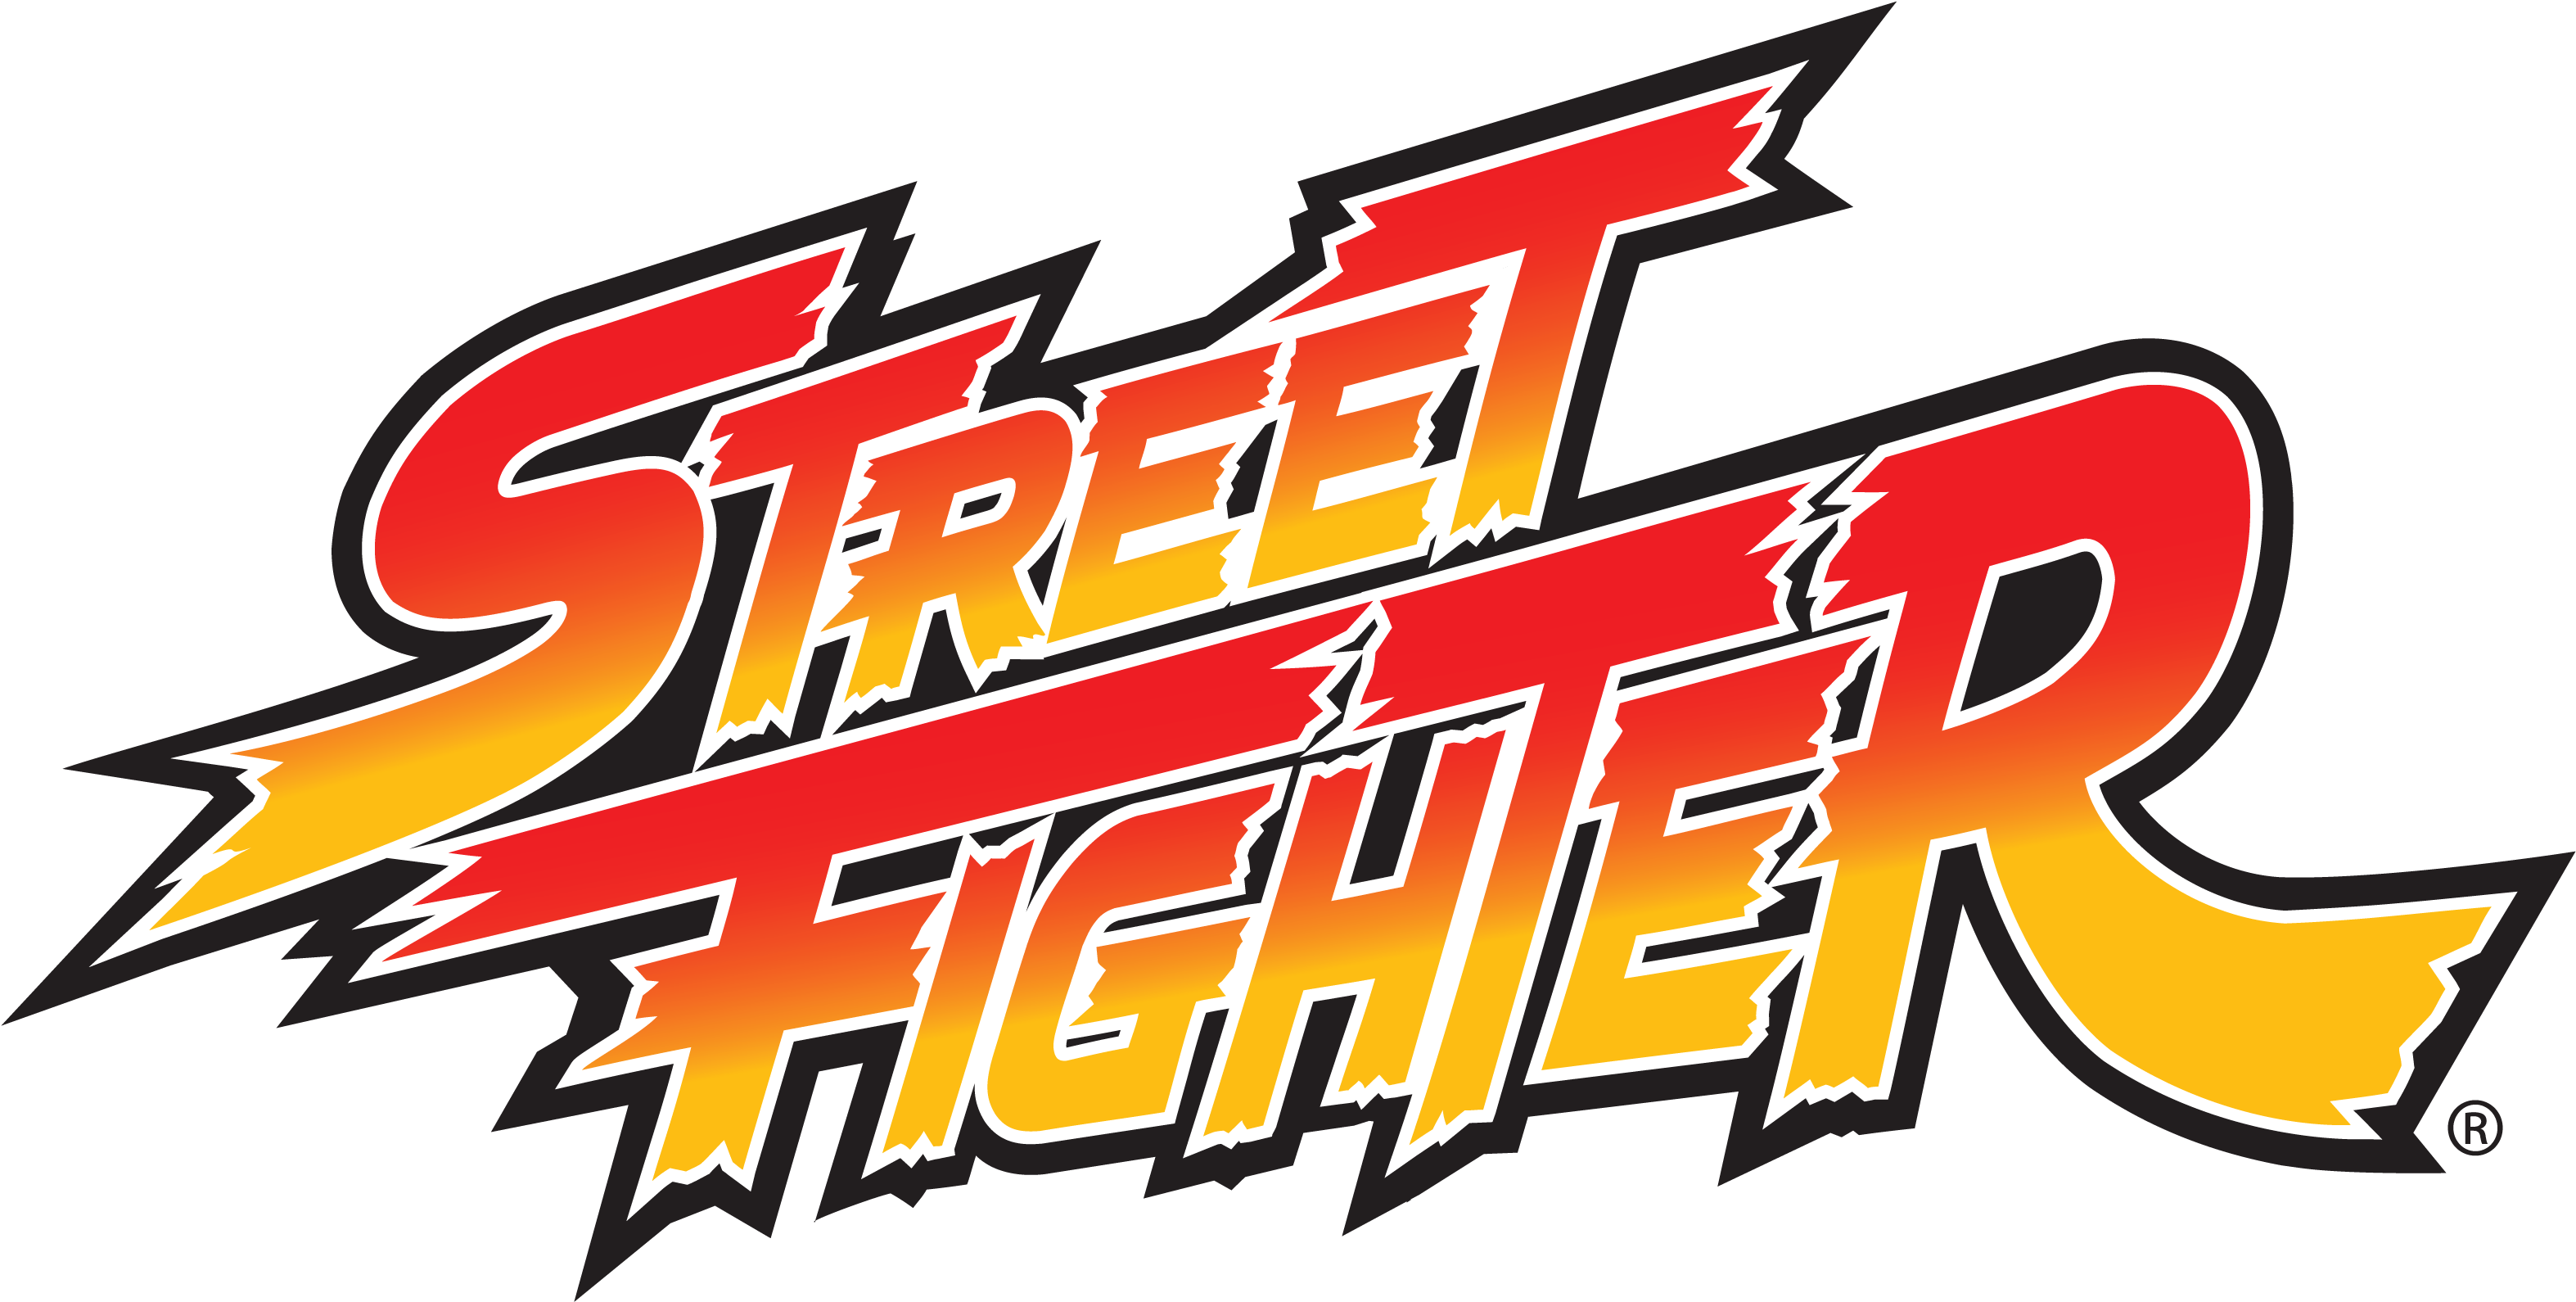 Dive Into All The Street Fighter Games And Merchandise - Street Fighter (3300x2550)